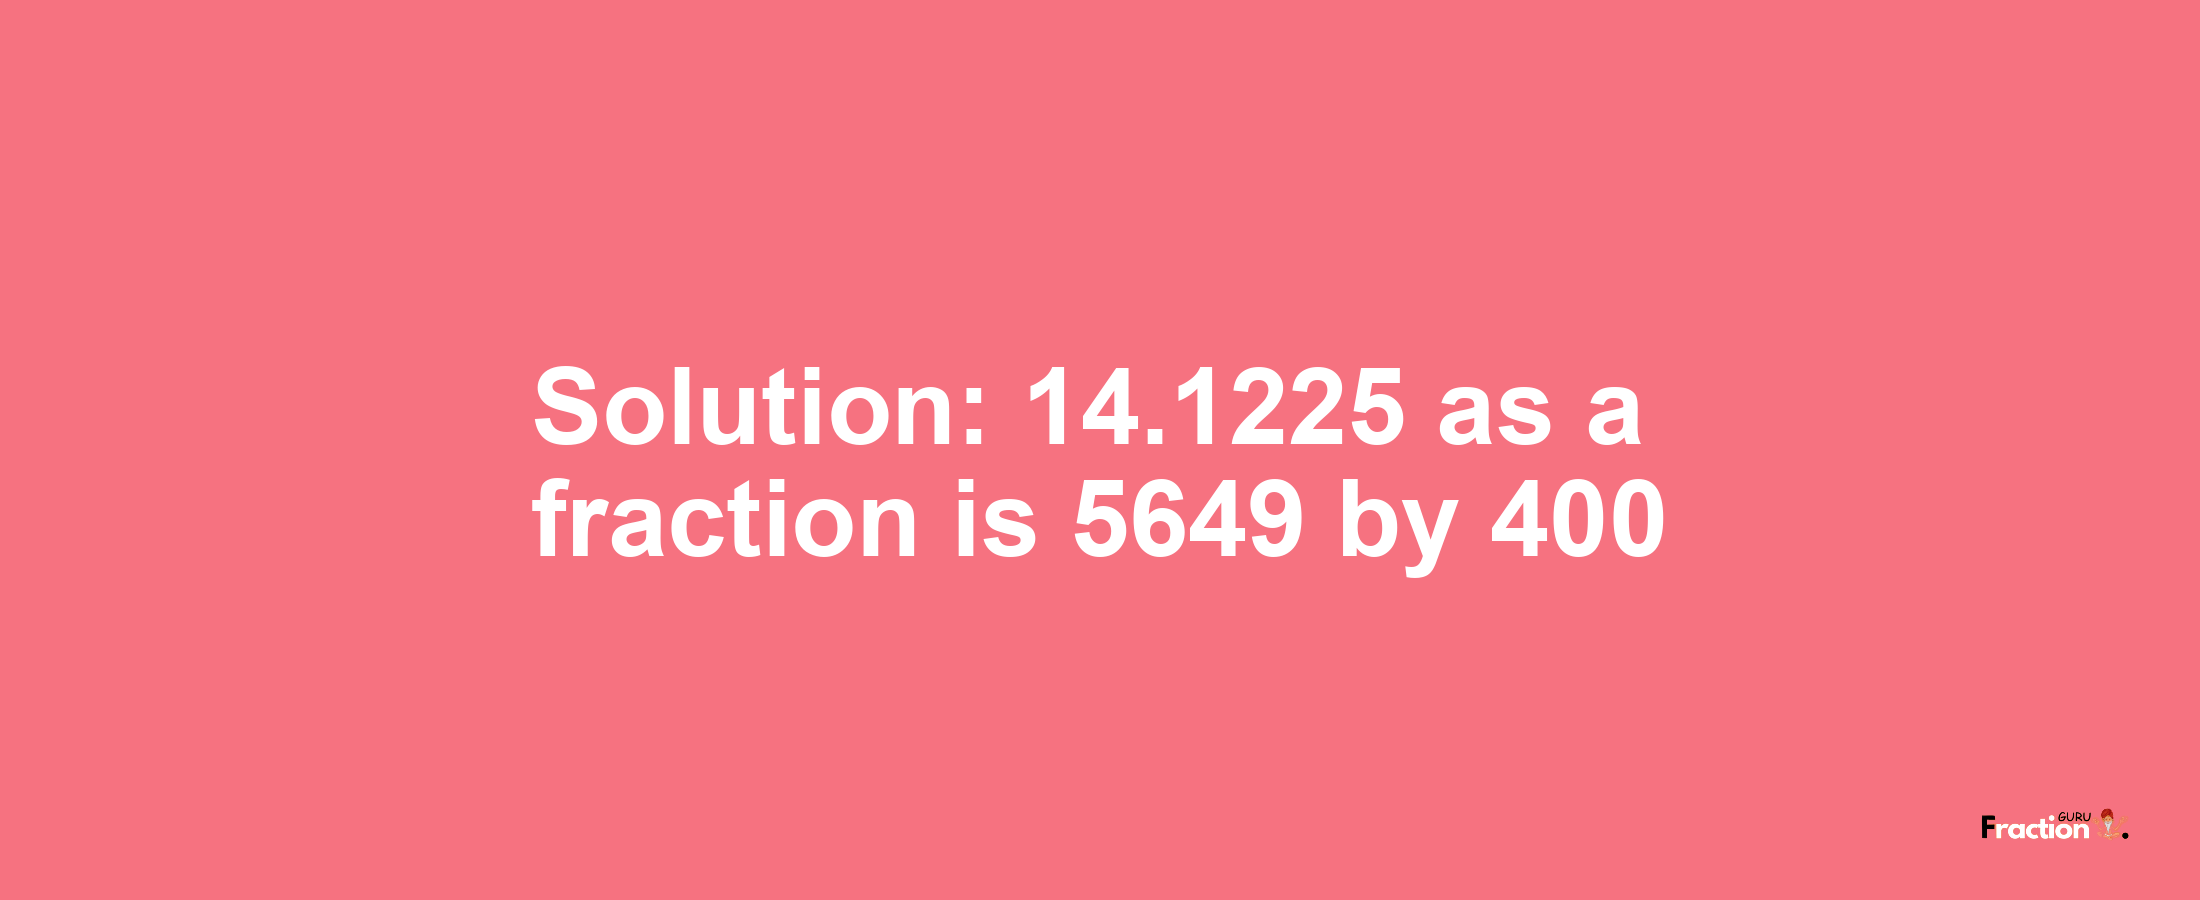 Solution:14.1225 as a fraction is 5649/400